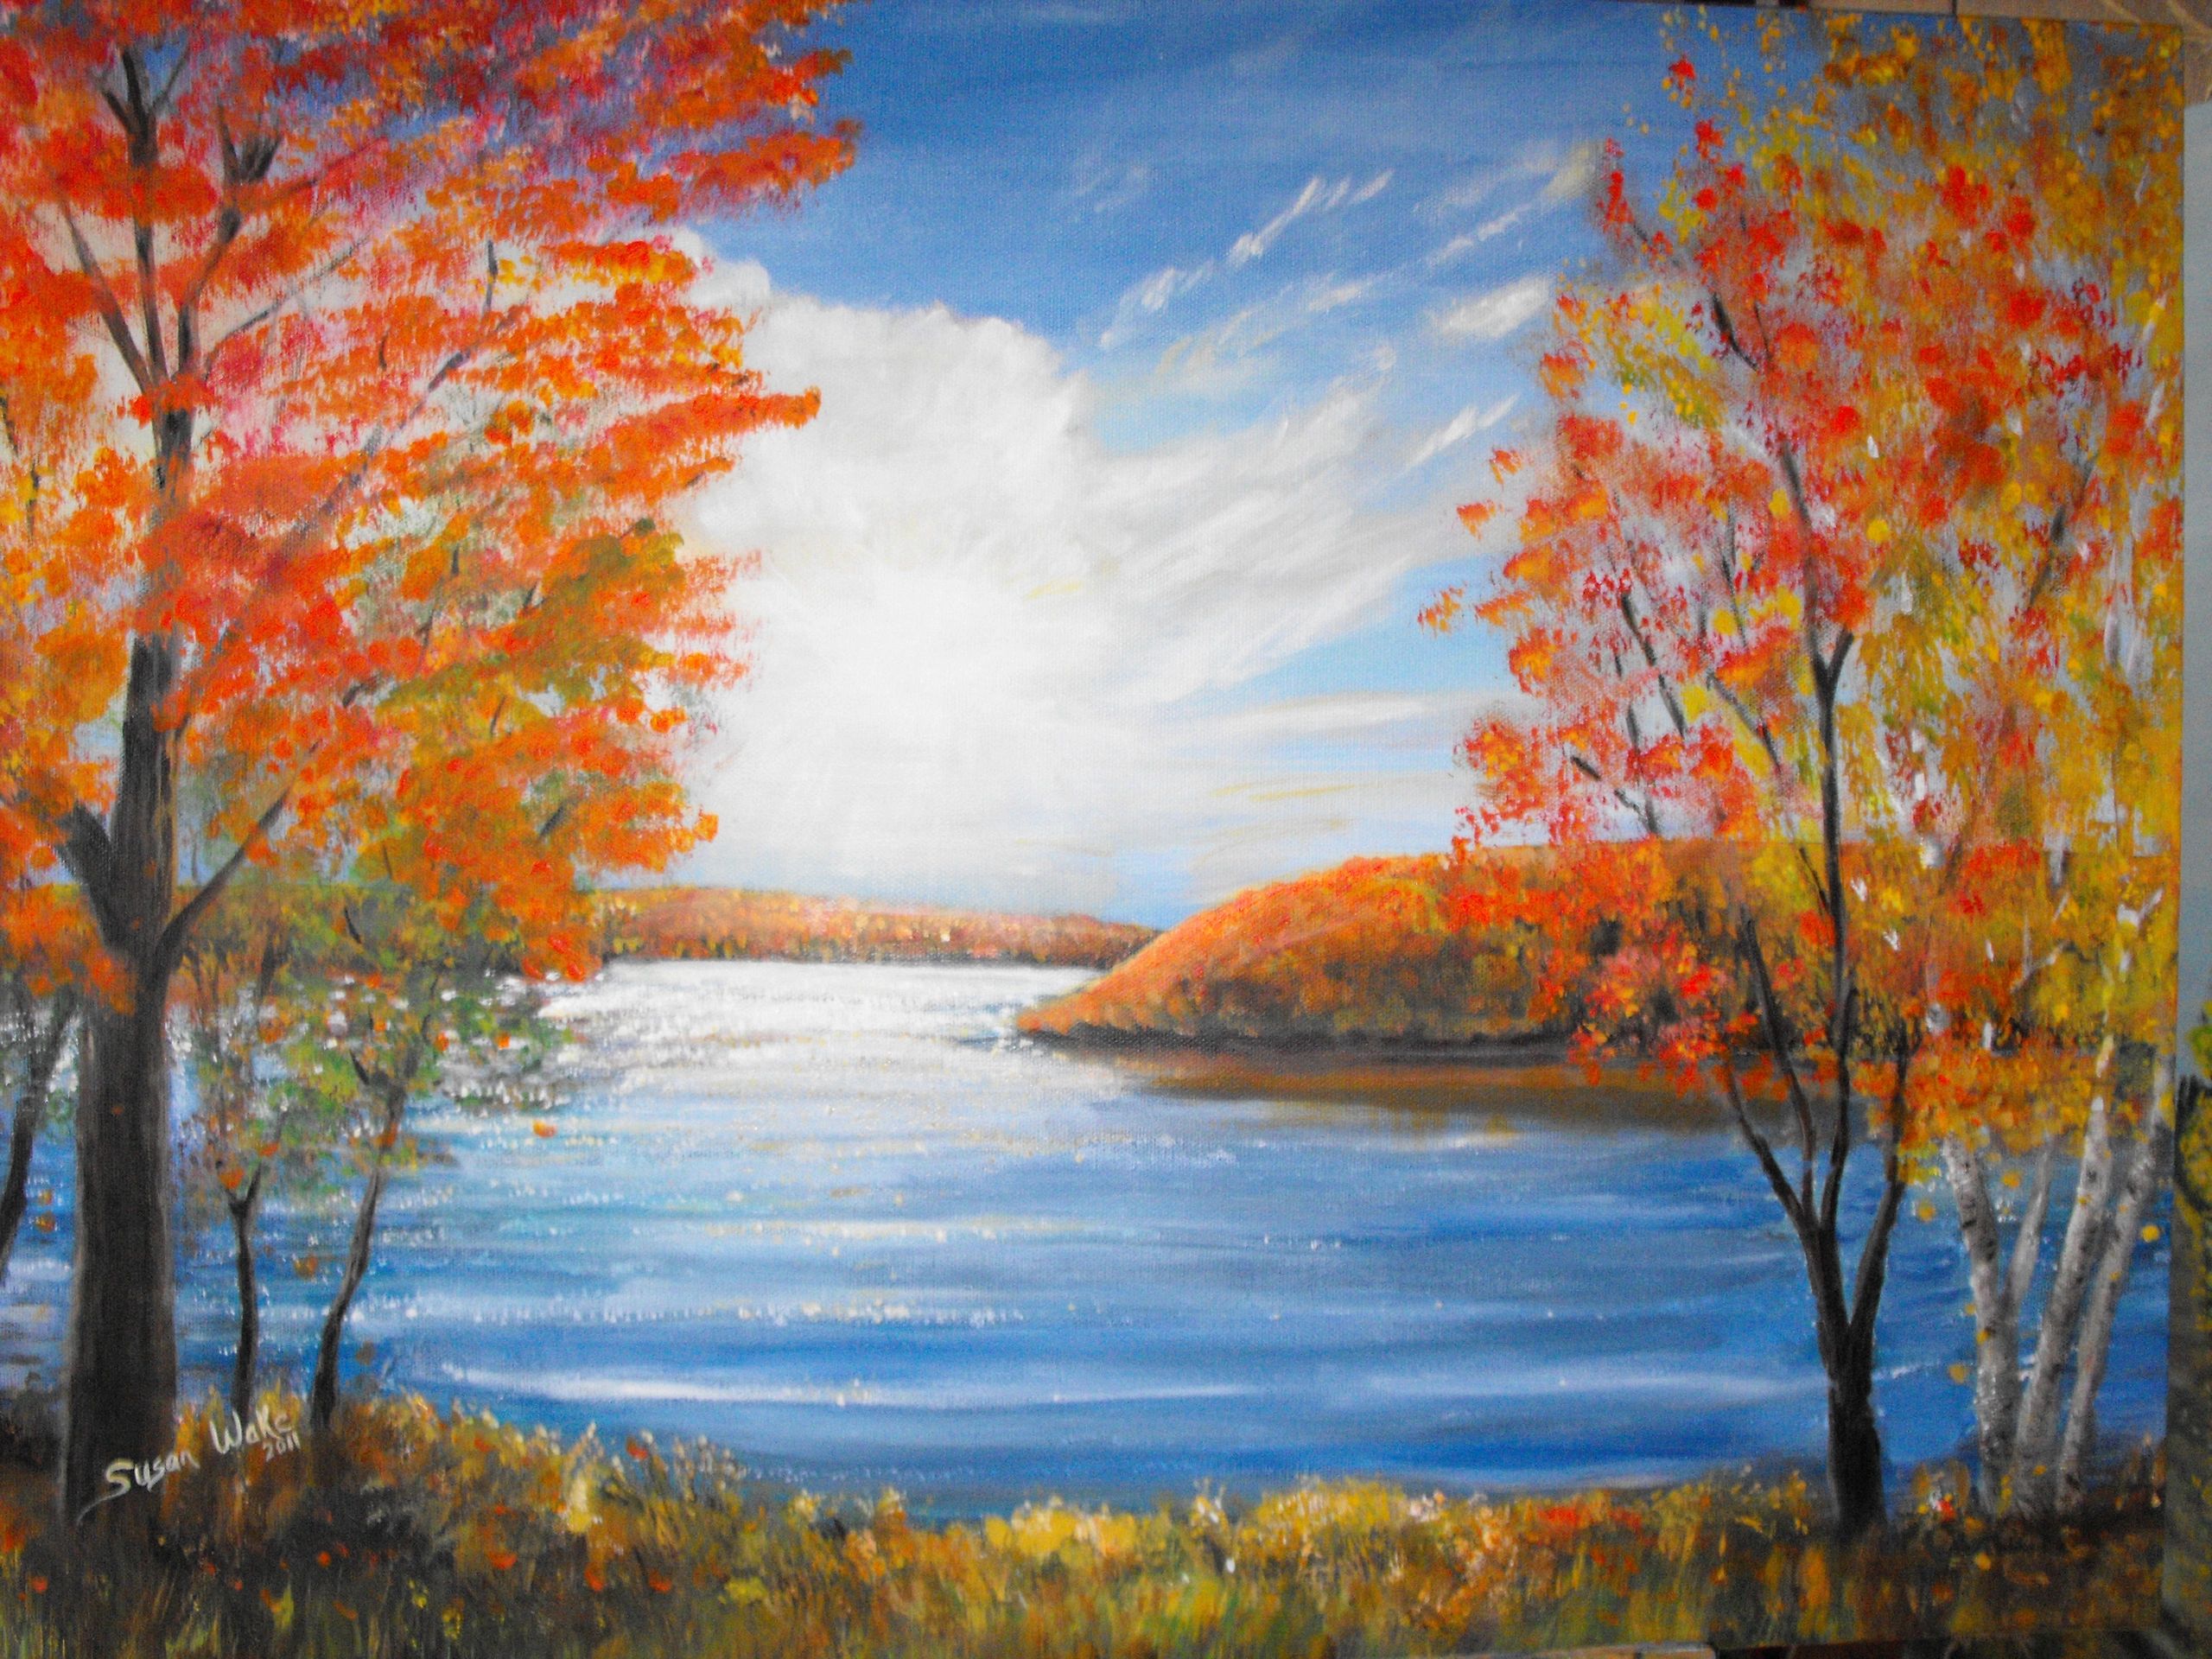 Commission Painting - Keuka Lake in Autumn